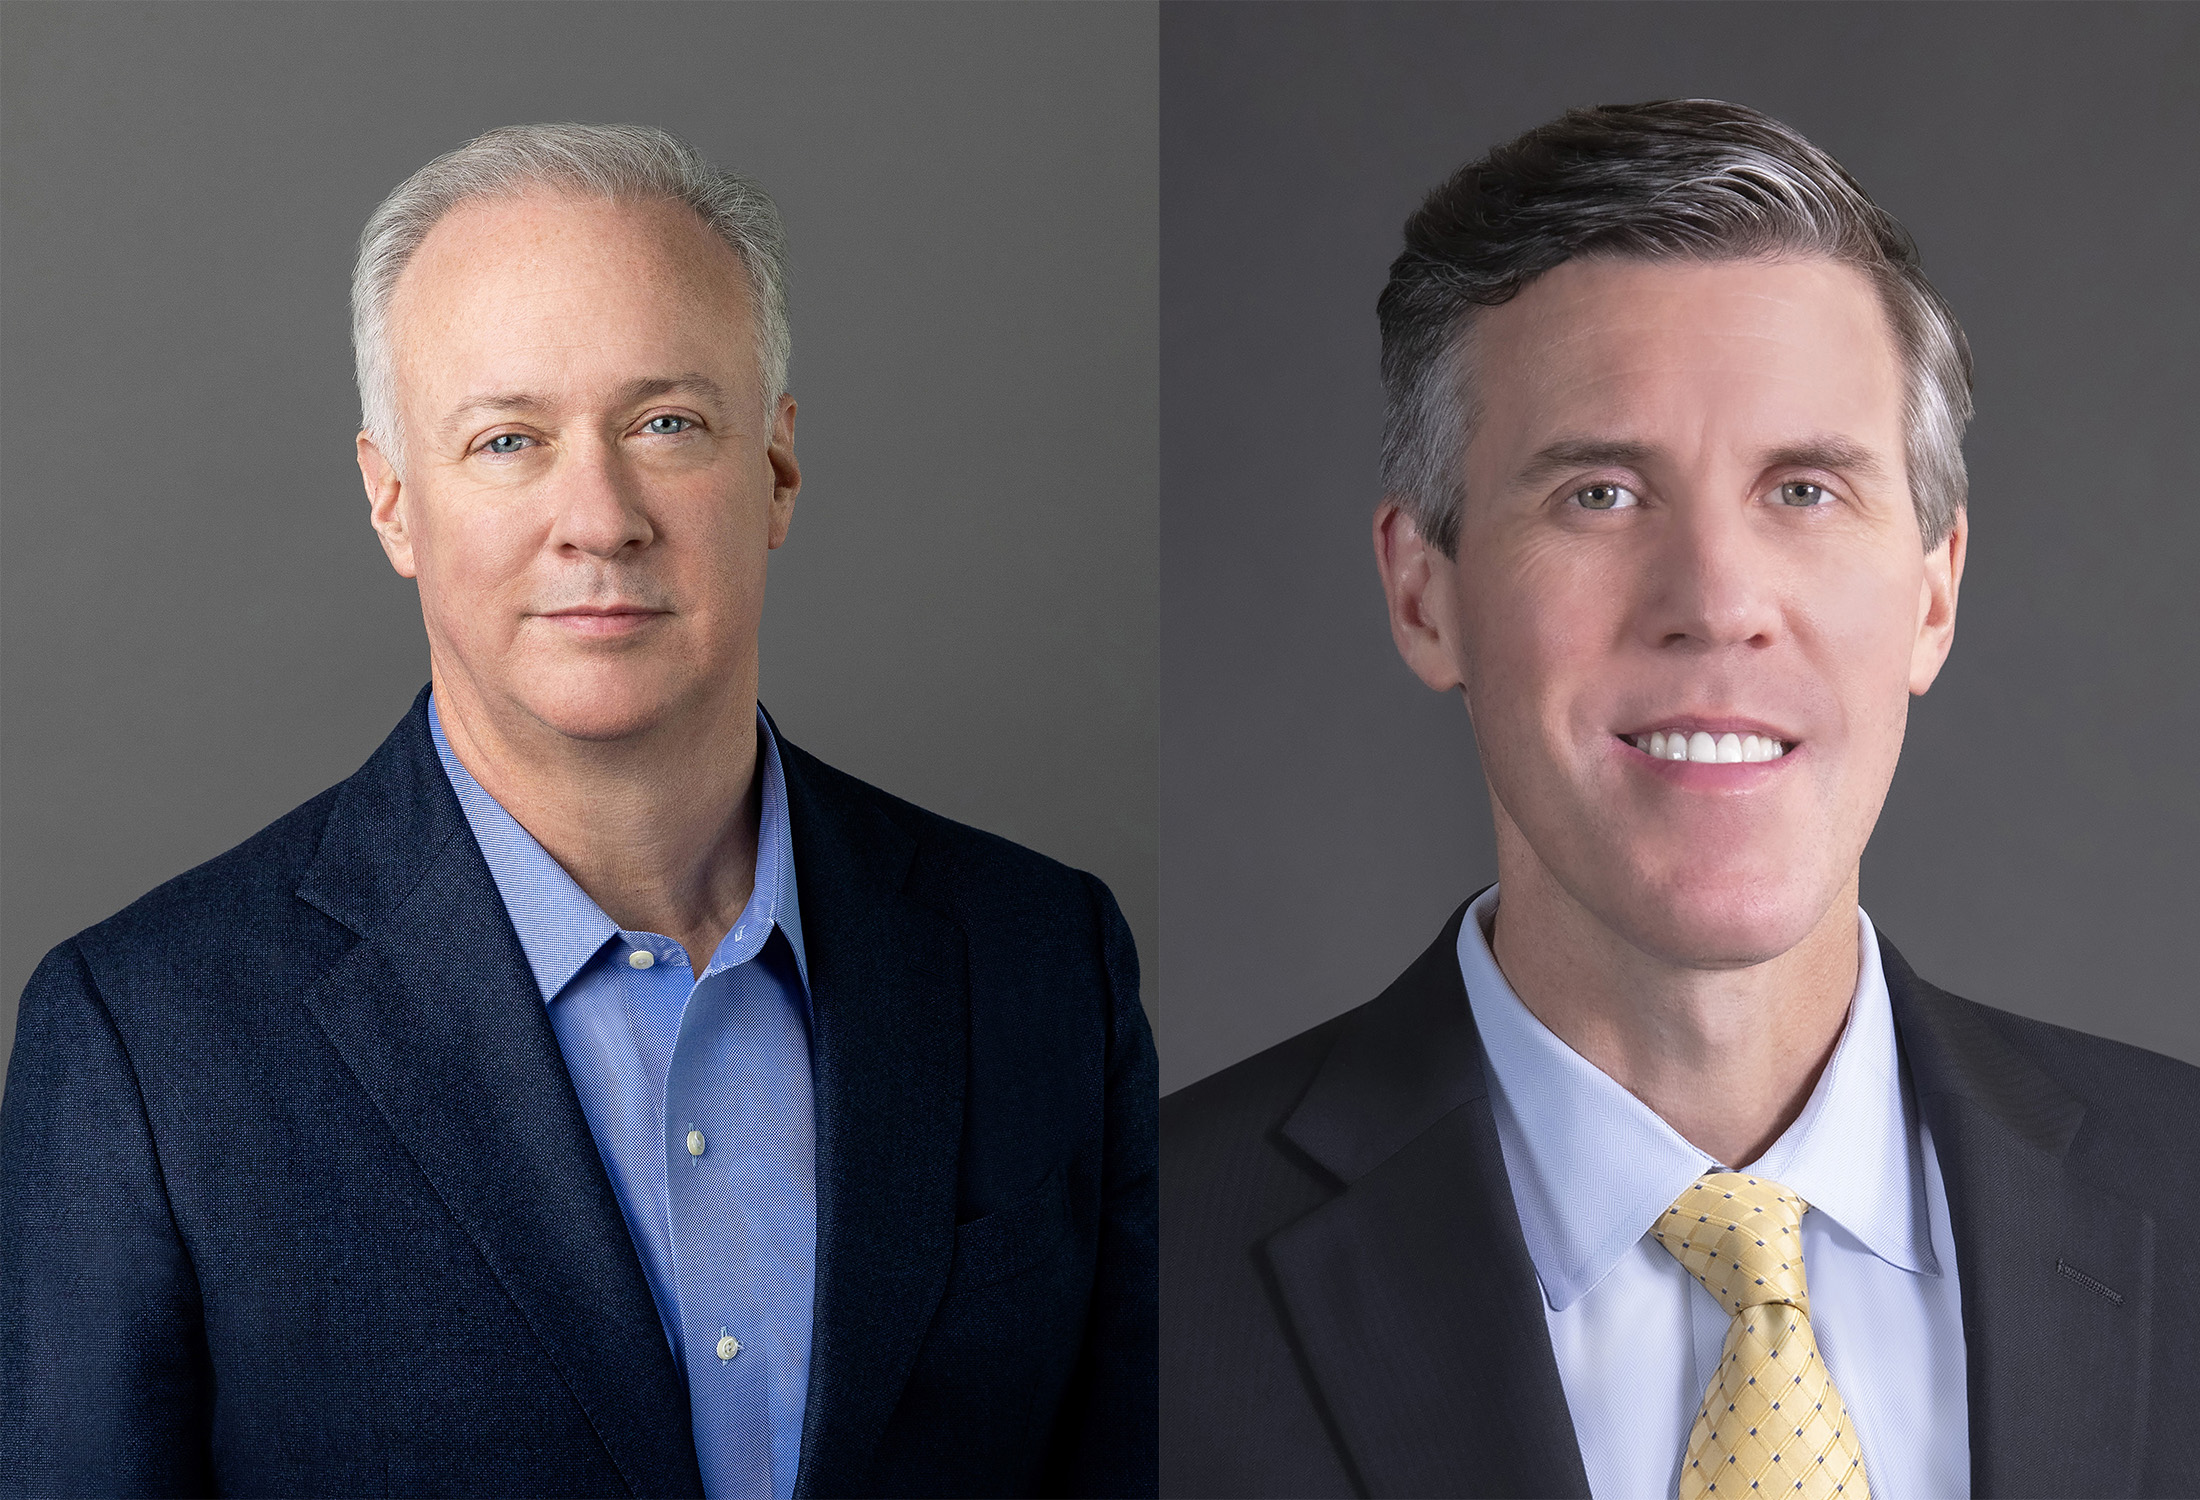 Tapestry, Inc. Appoints Kevin Hourican and David Elkins to Board of Directors